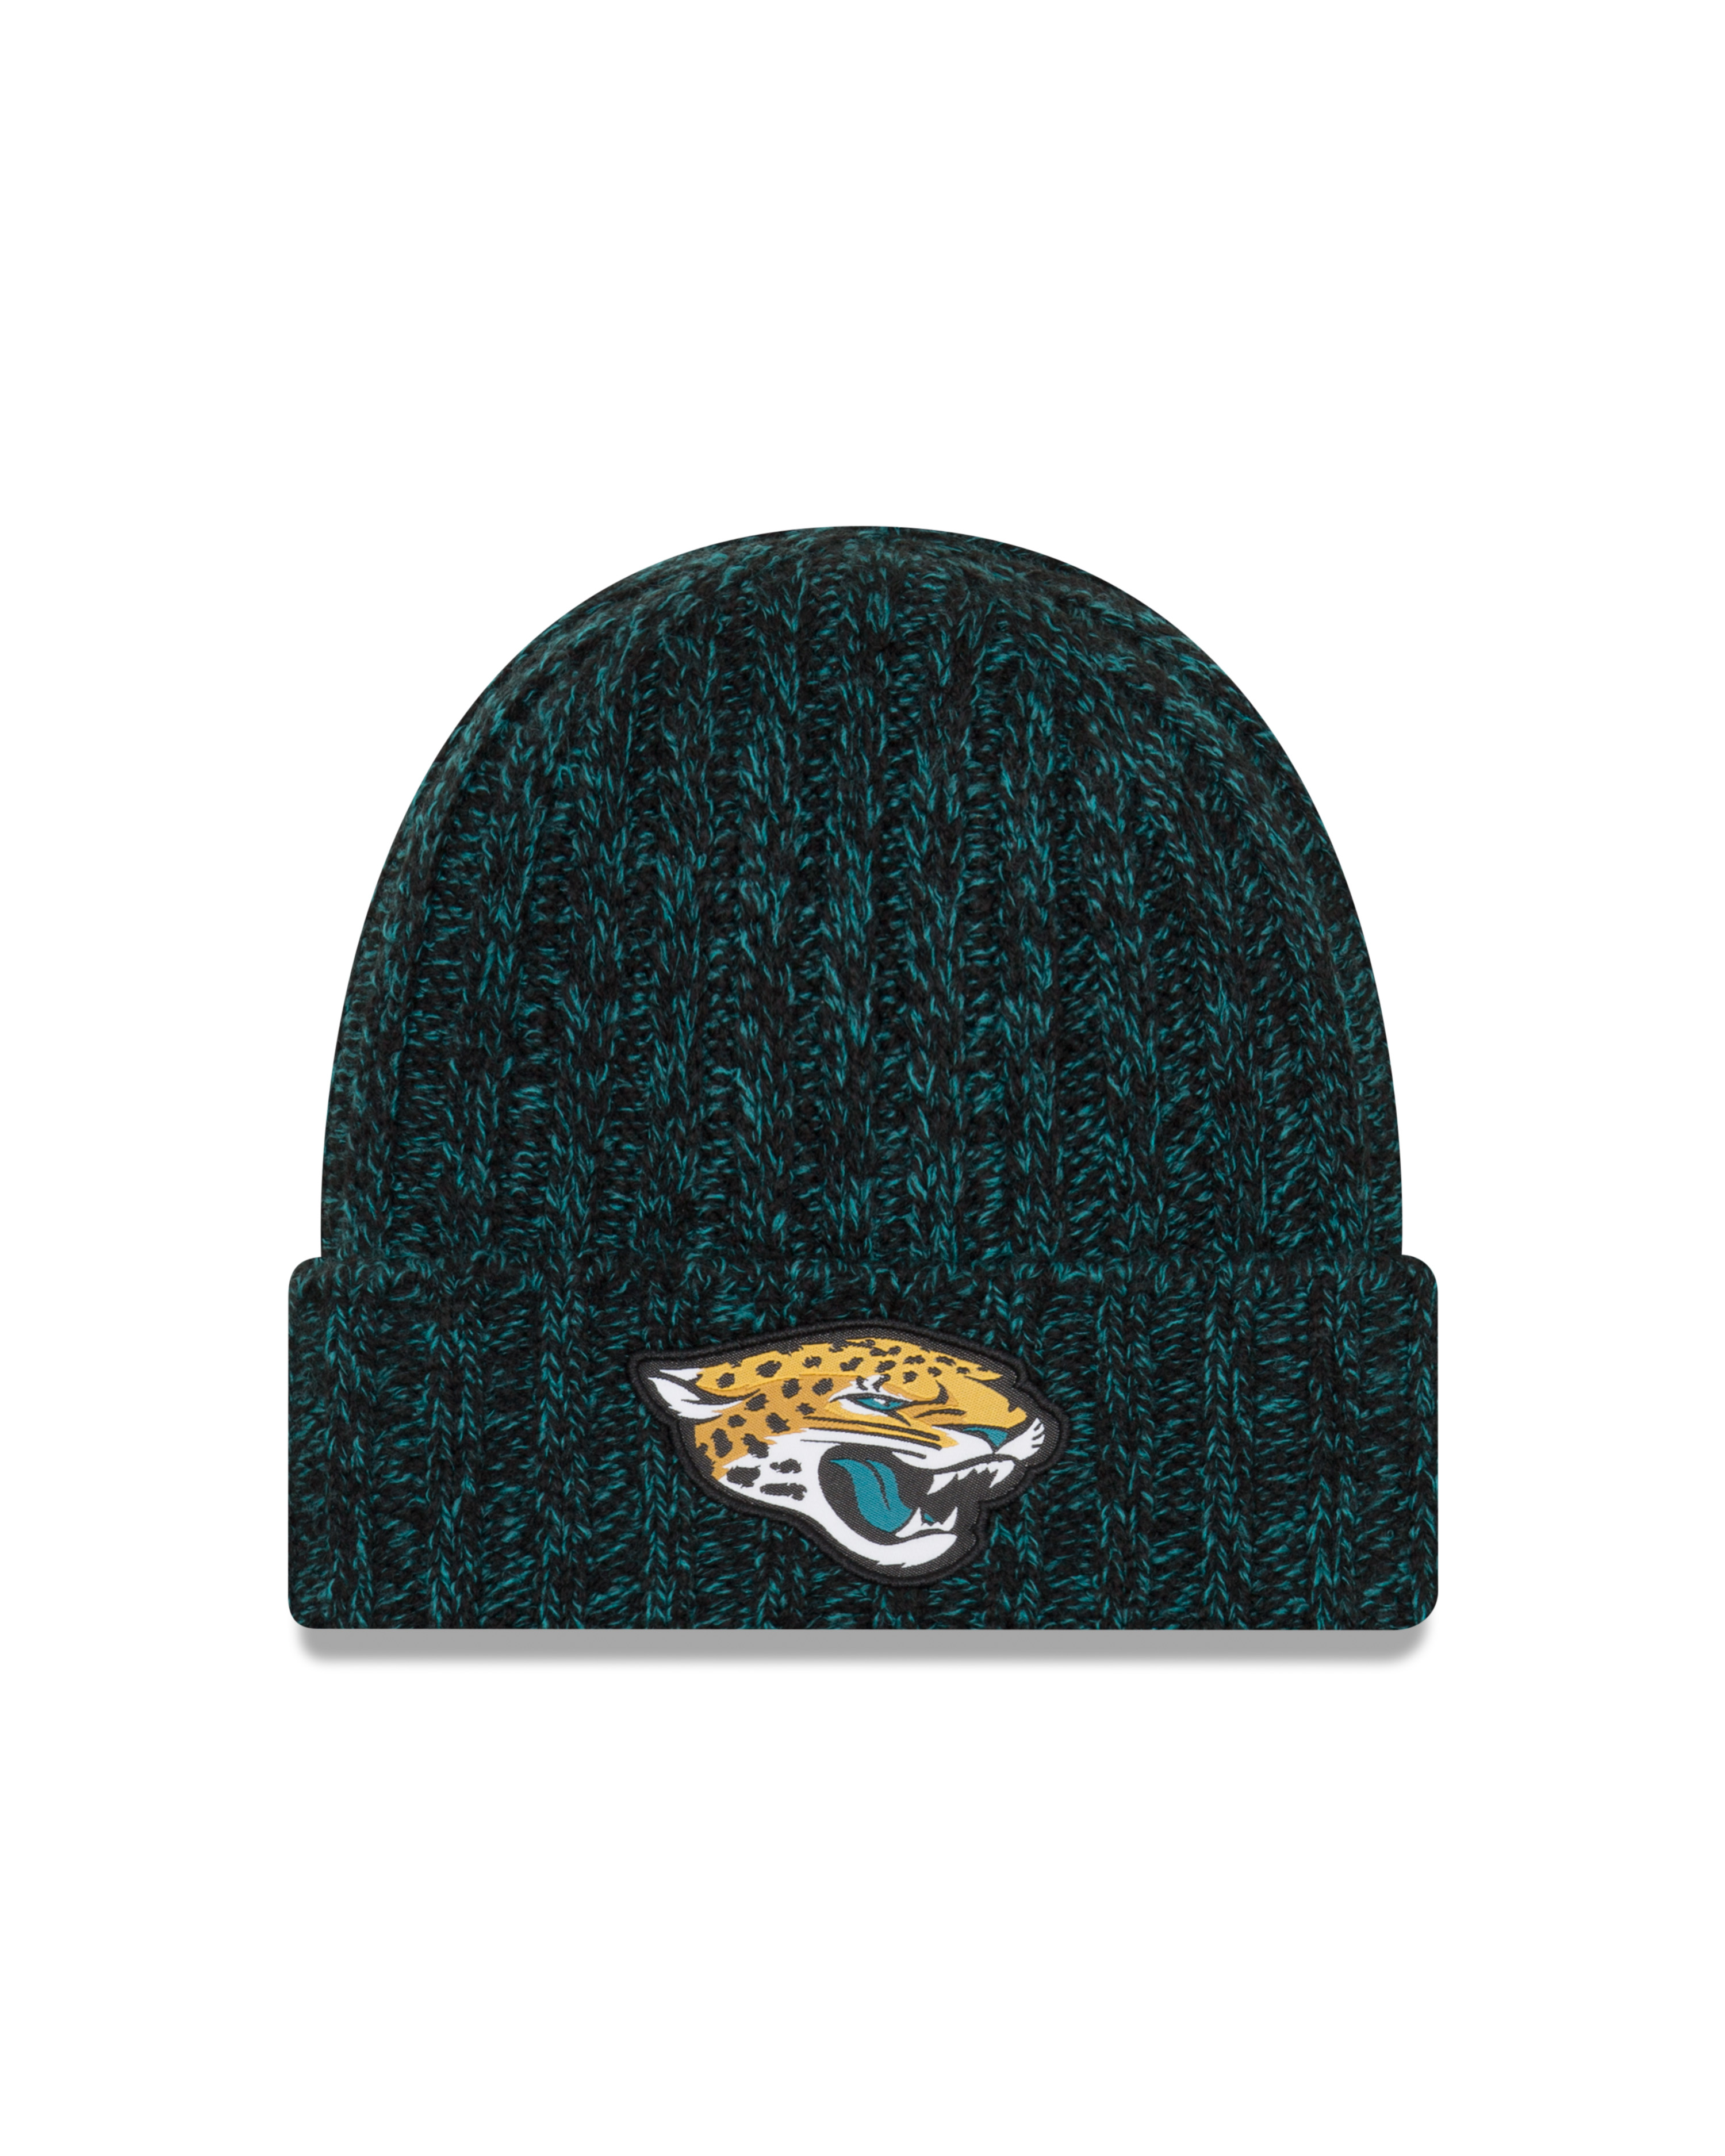 New Era Official NFL Cold Weather Collection #81